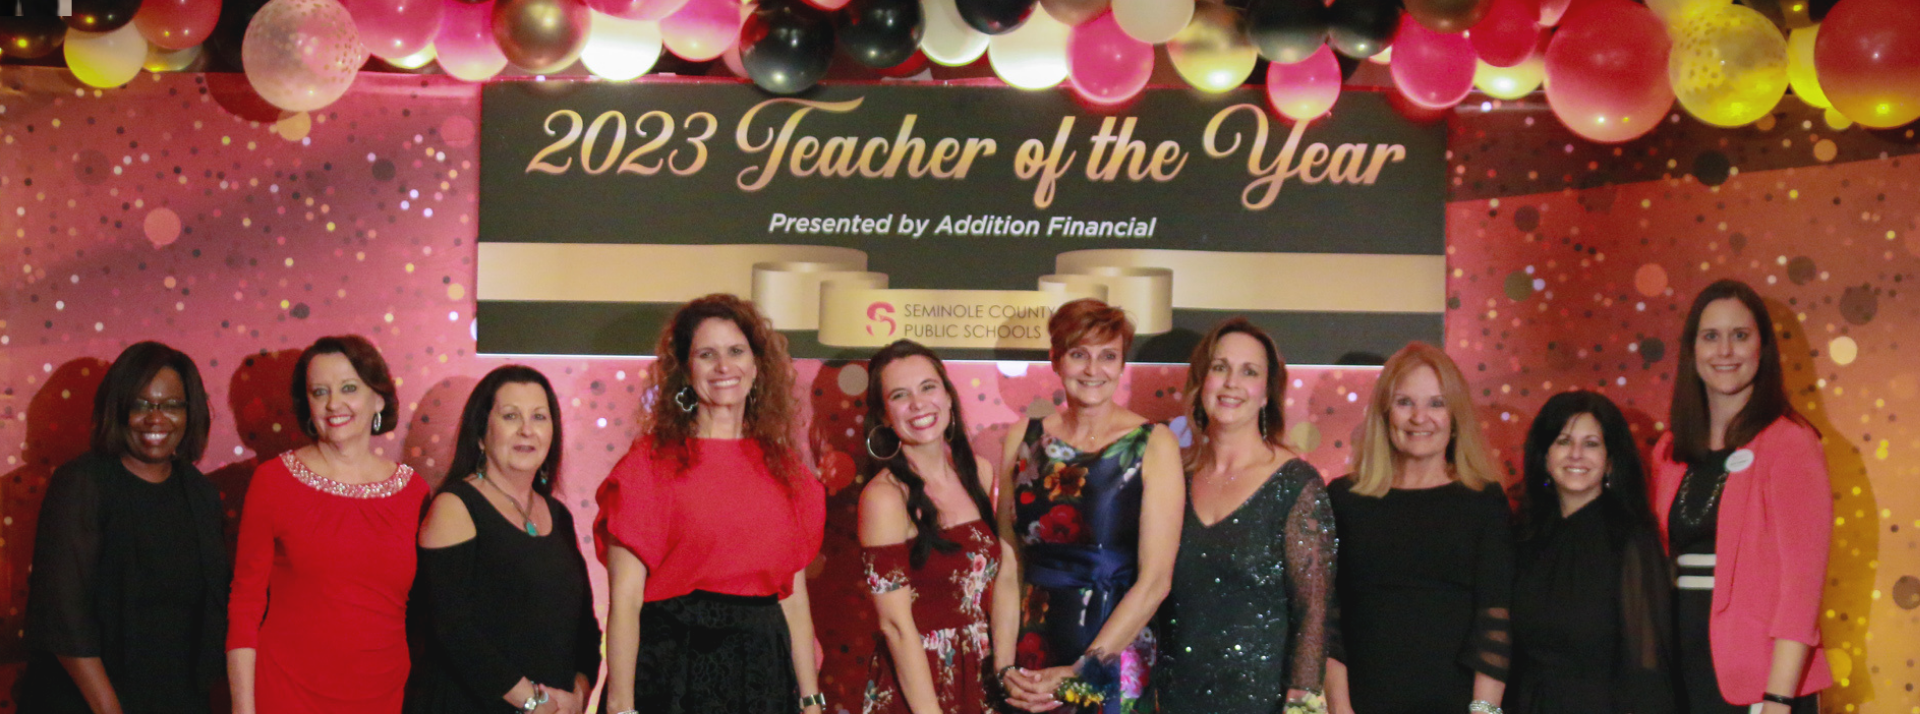 Bringing the community together to honor the best and brightest Seminole County educators.